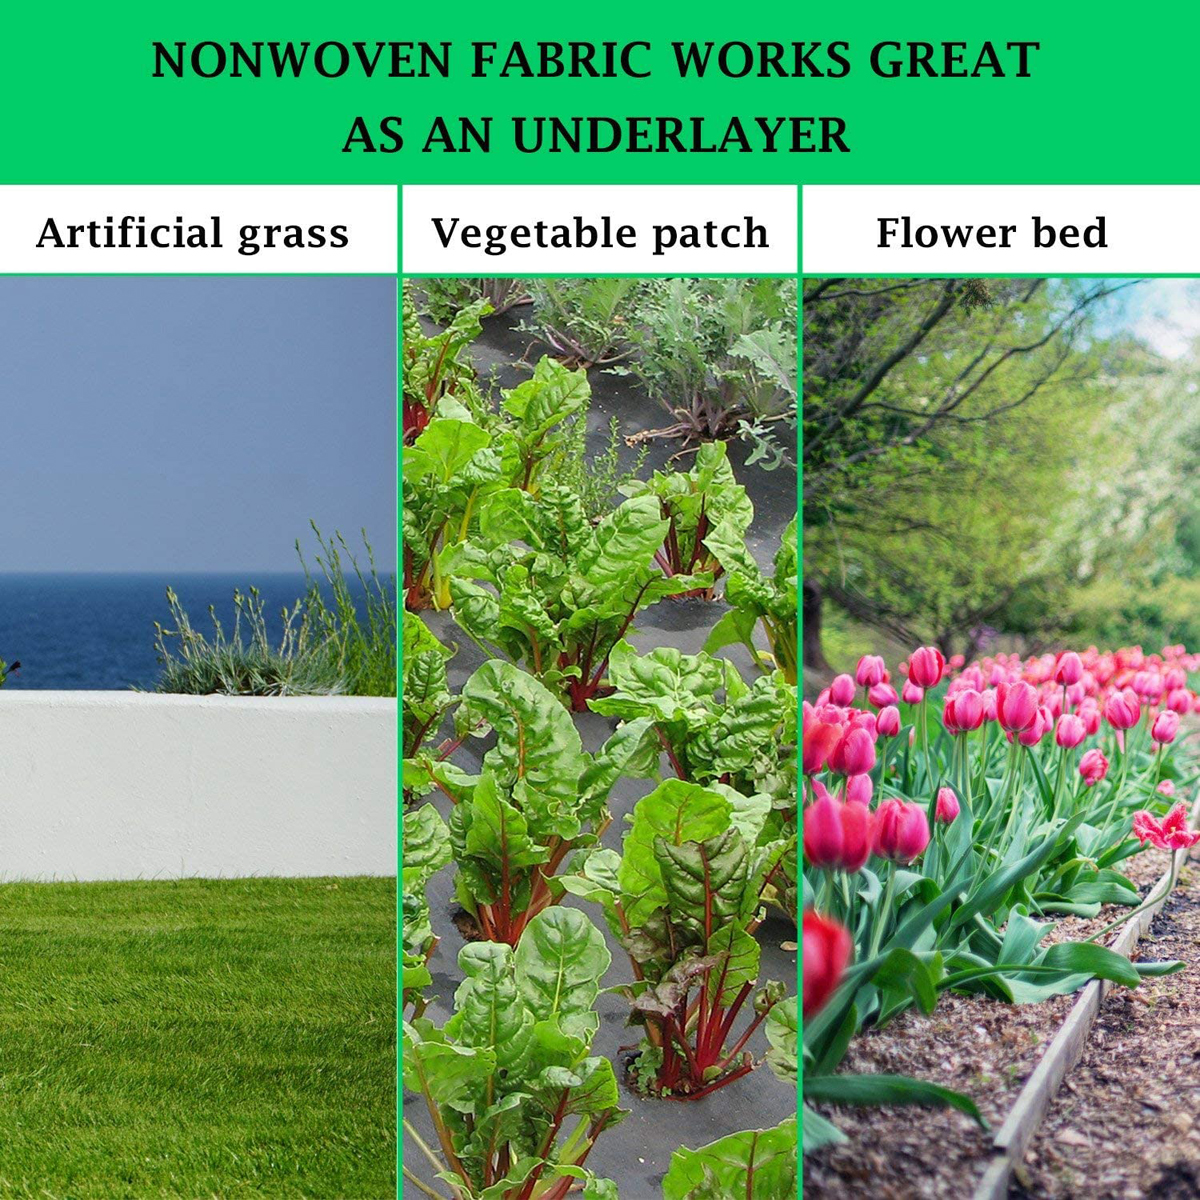 121524m-Wide-70gsm-Weed-Control-Fabric-Ground-Cover-Membrane-Garden-Landscape-1831388-5